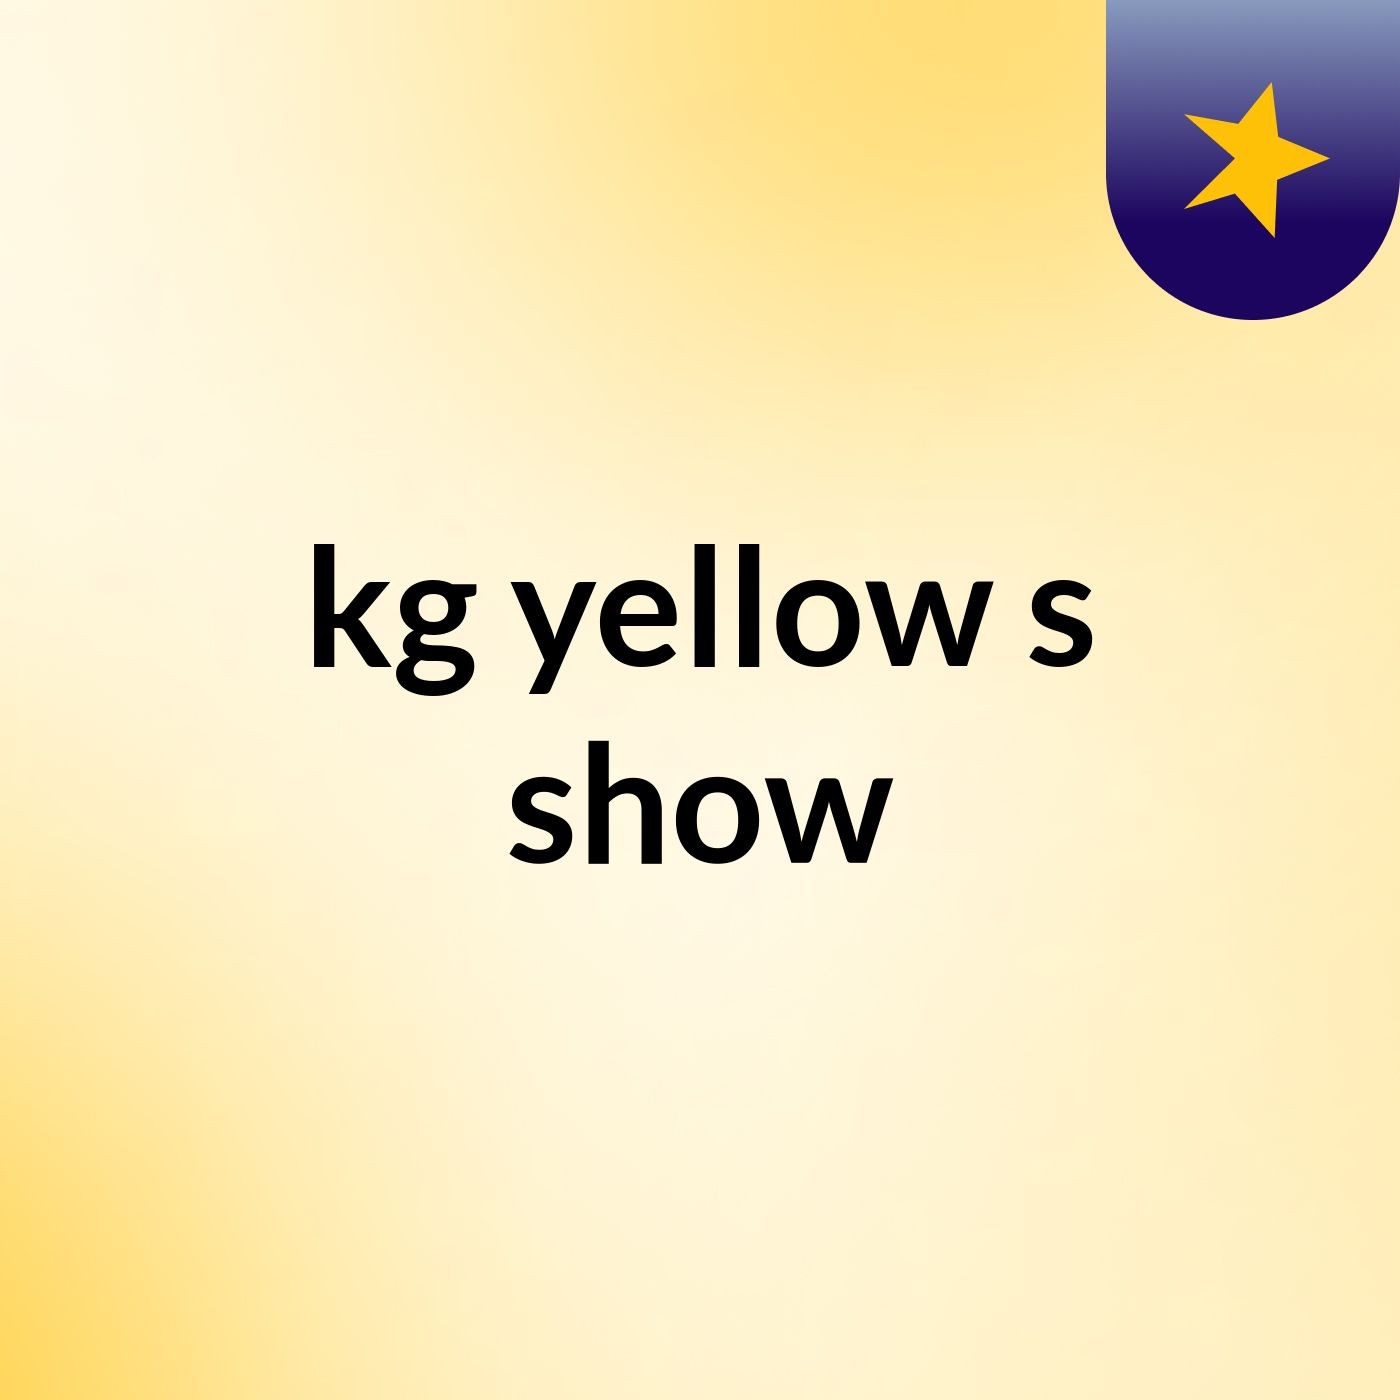 kg yellow's show